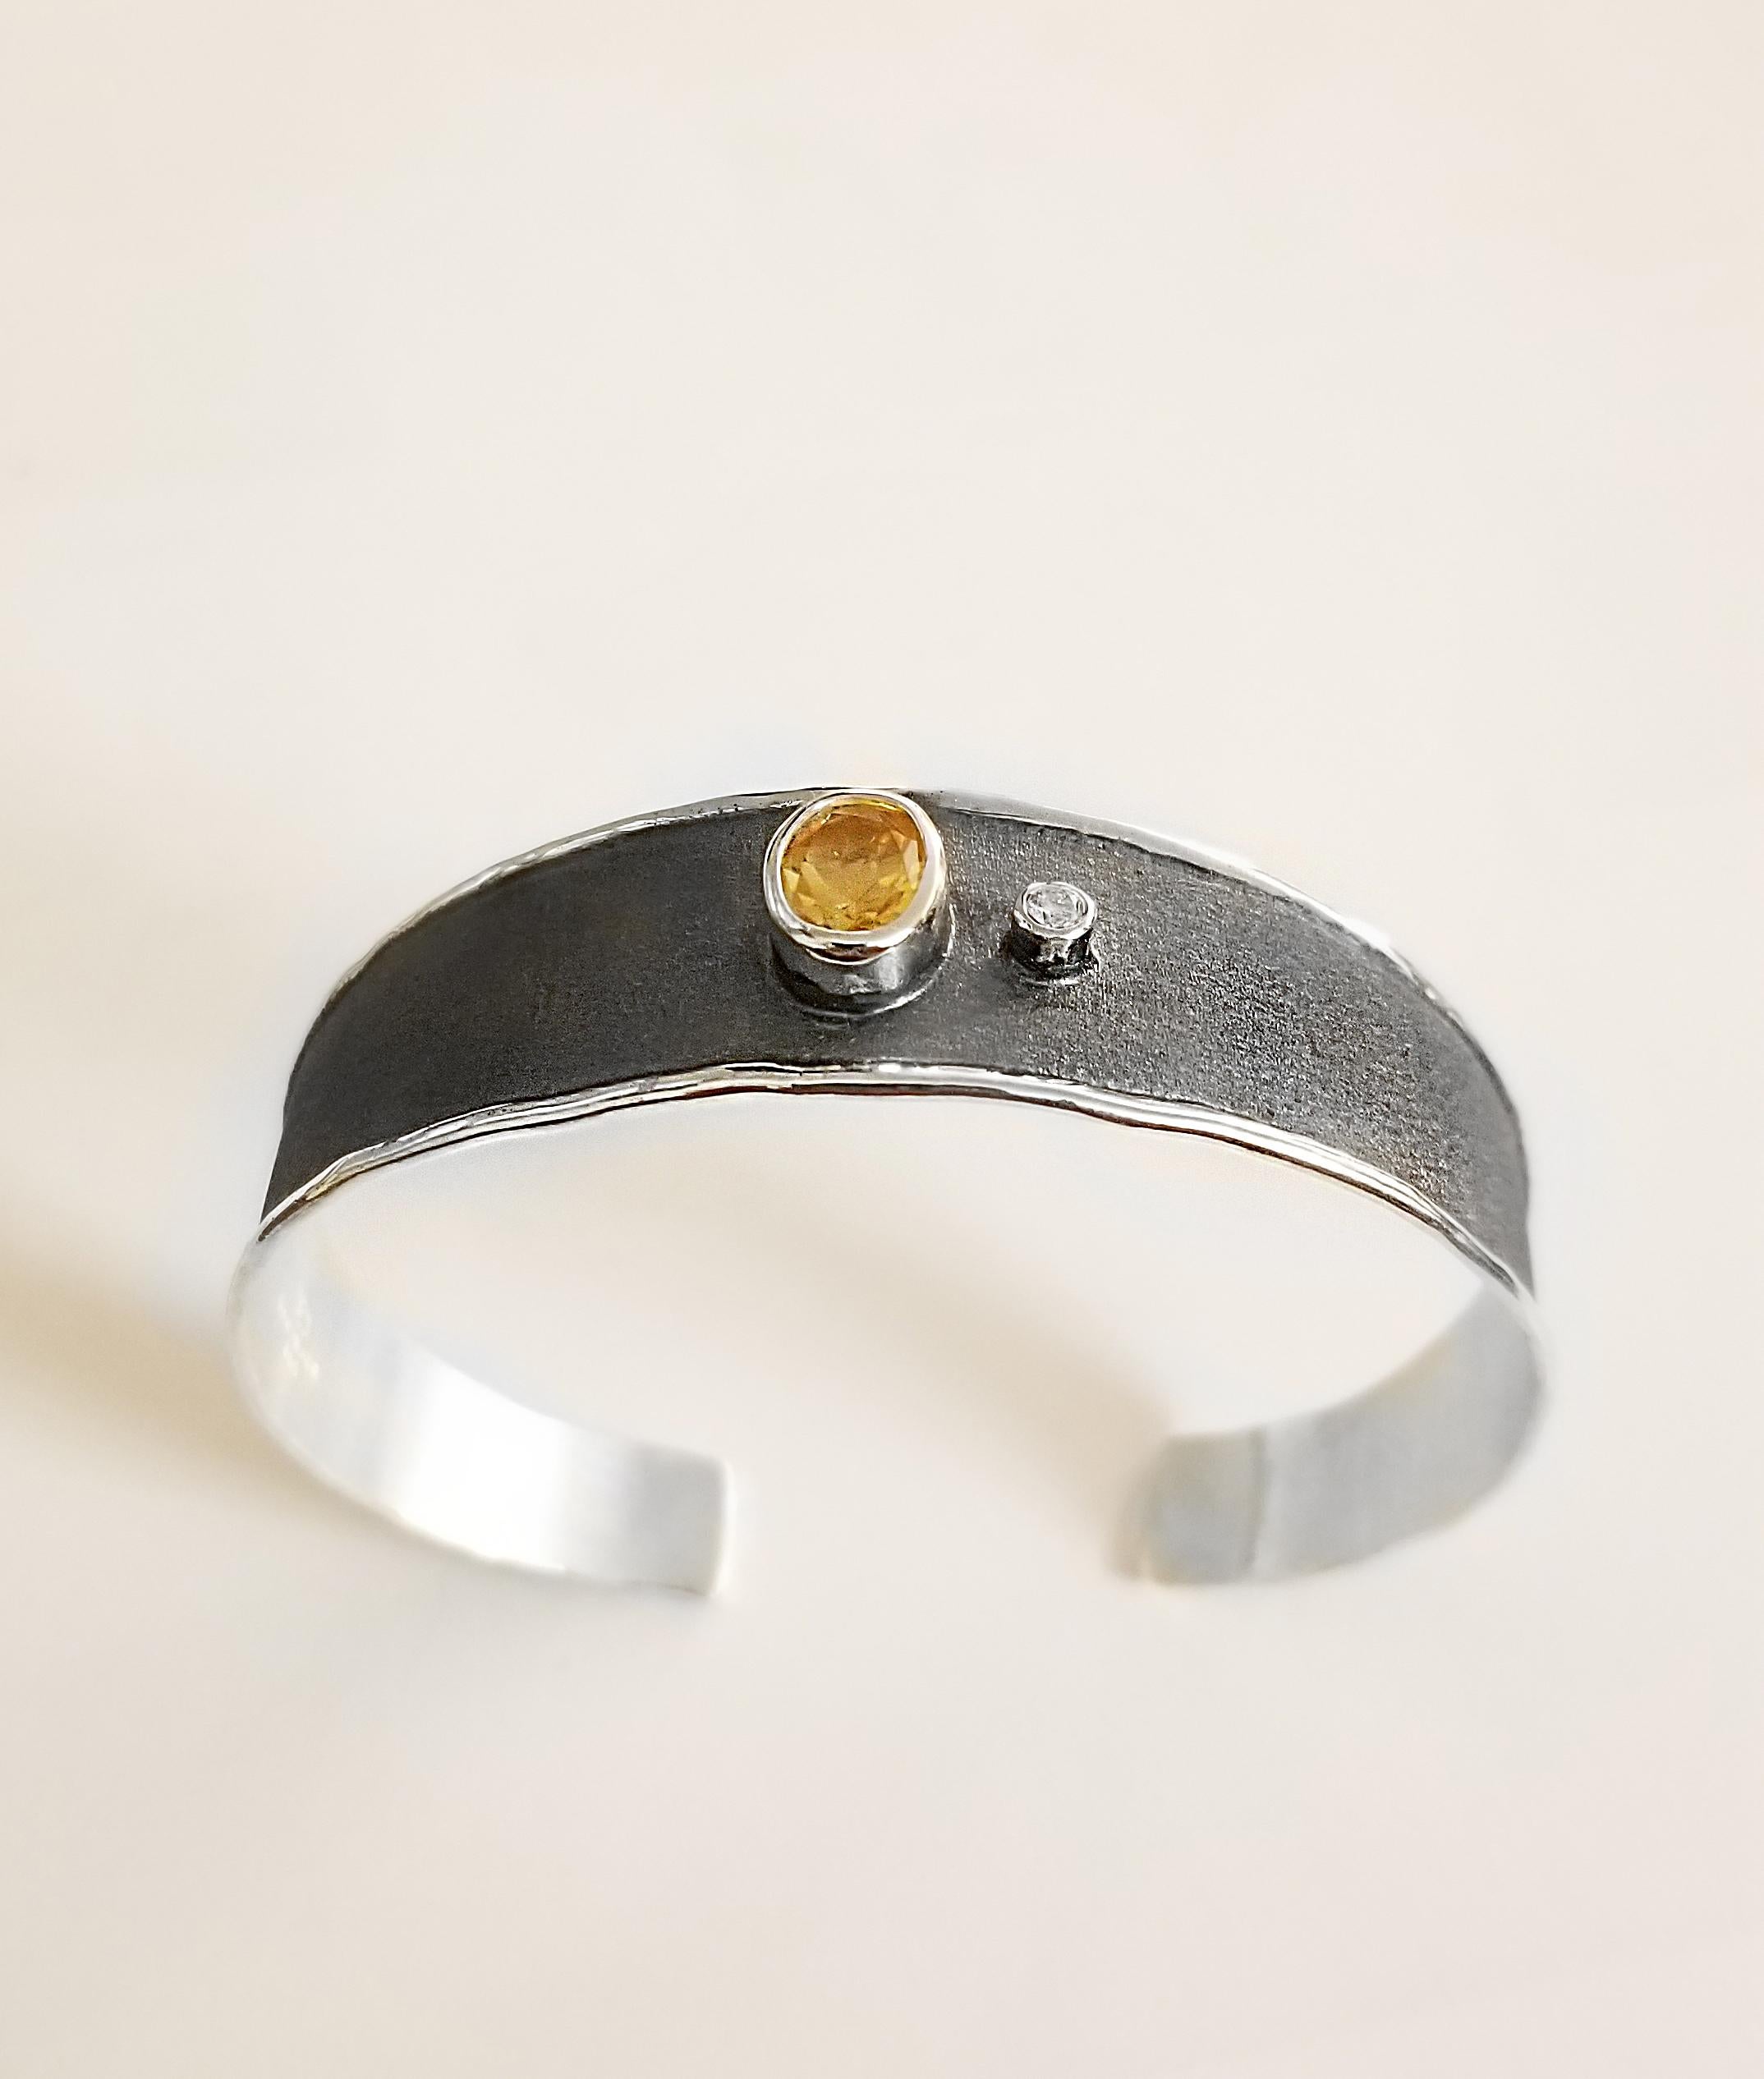 Women's Yianni Creations 2.50 Carat Citrine Diamond Fine Silver Set of Ring and Bracelet For Sale